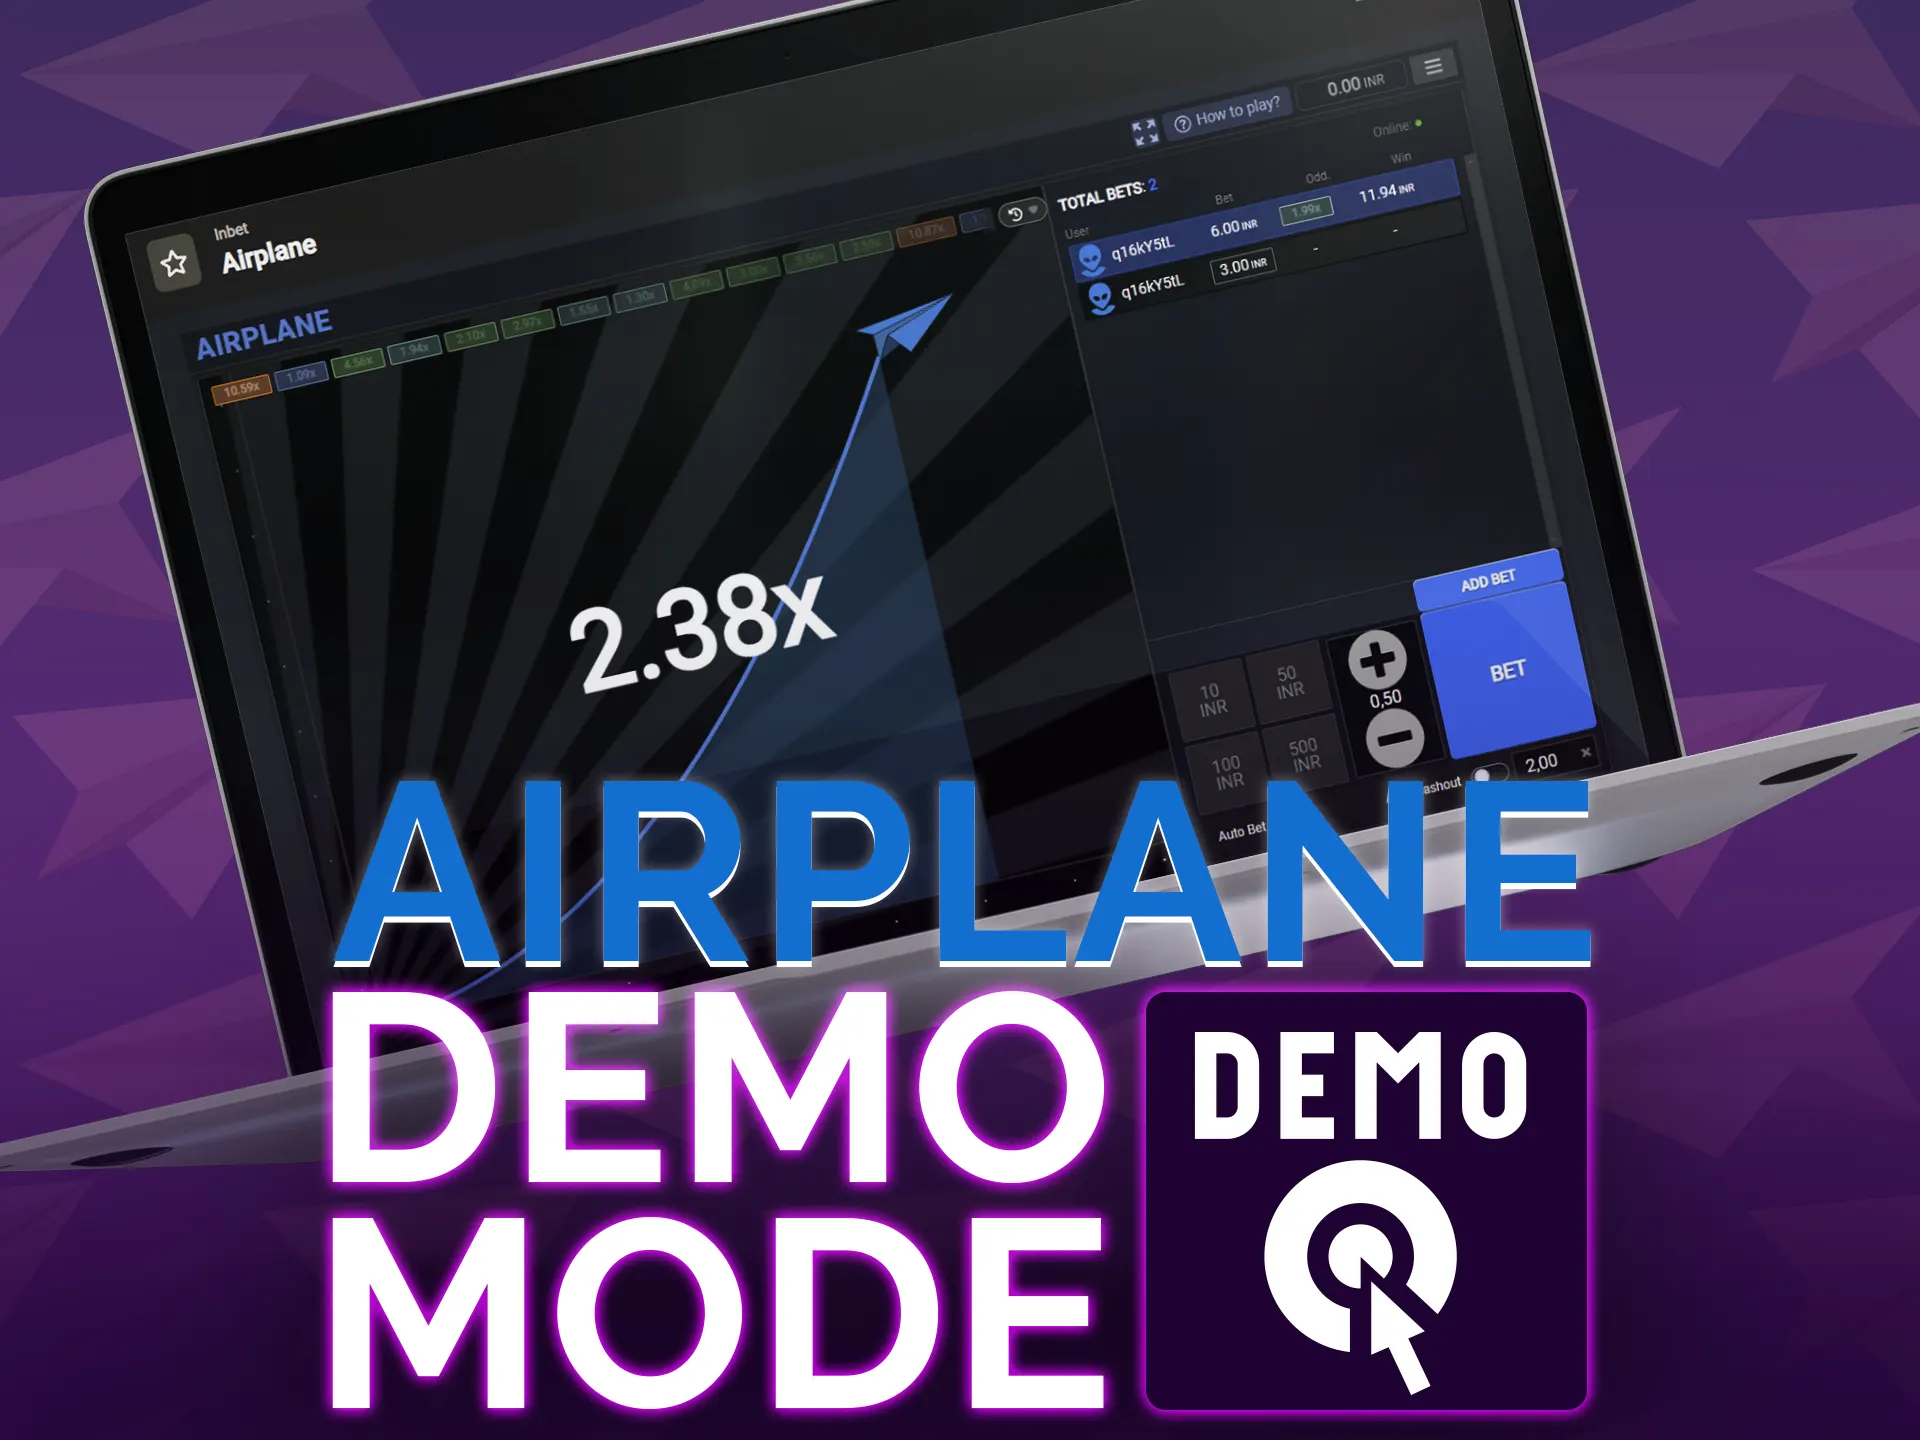 Try Airplane for free to learn and practice.